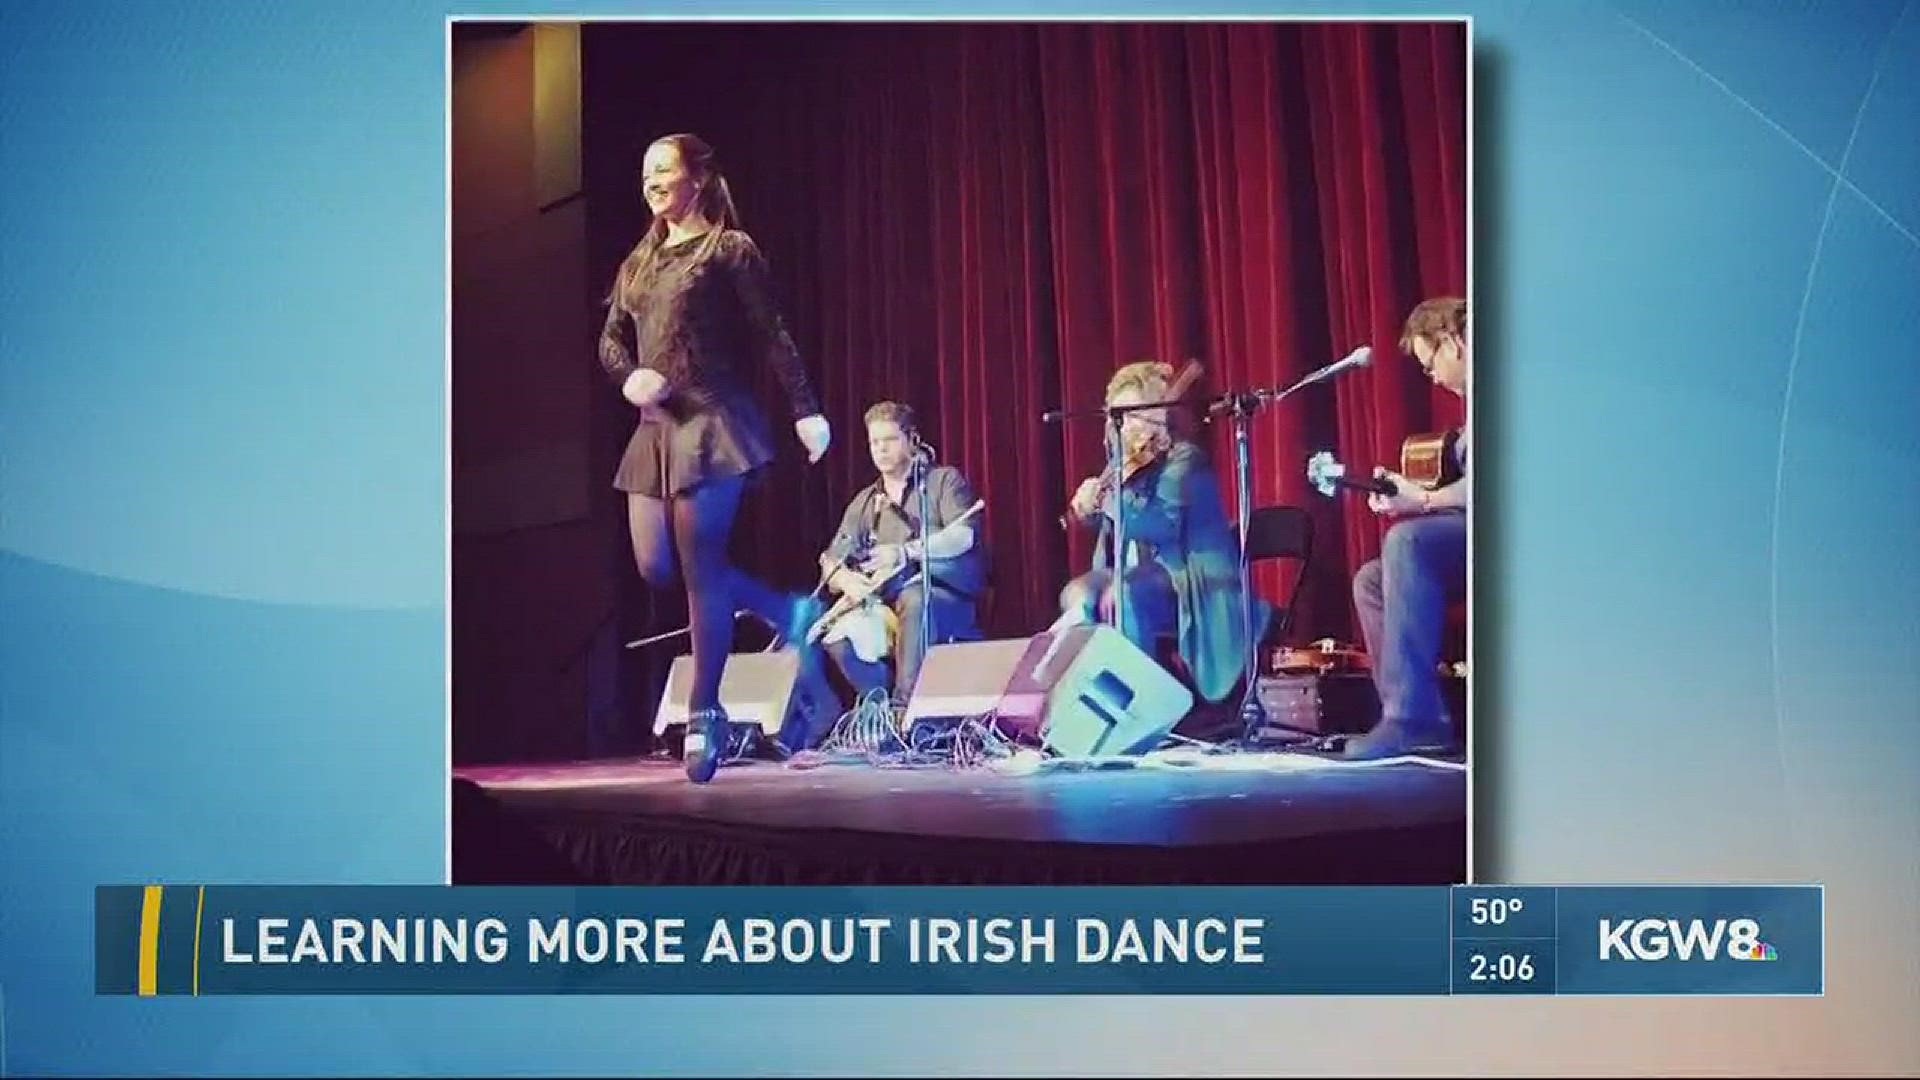 Learning more about Irish dance